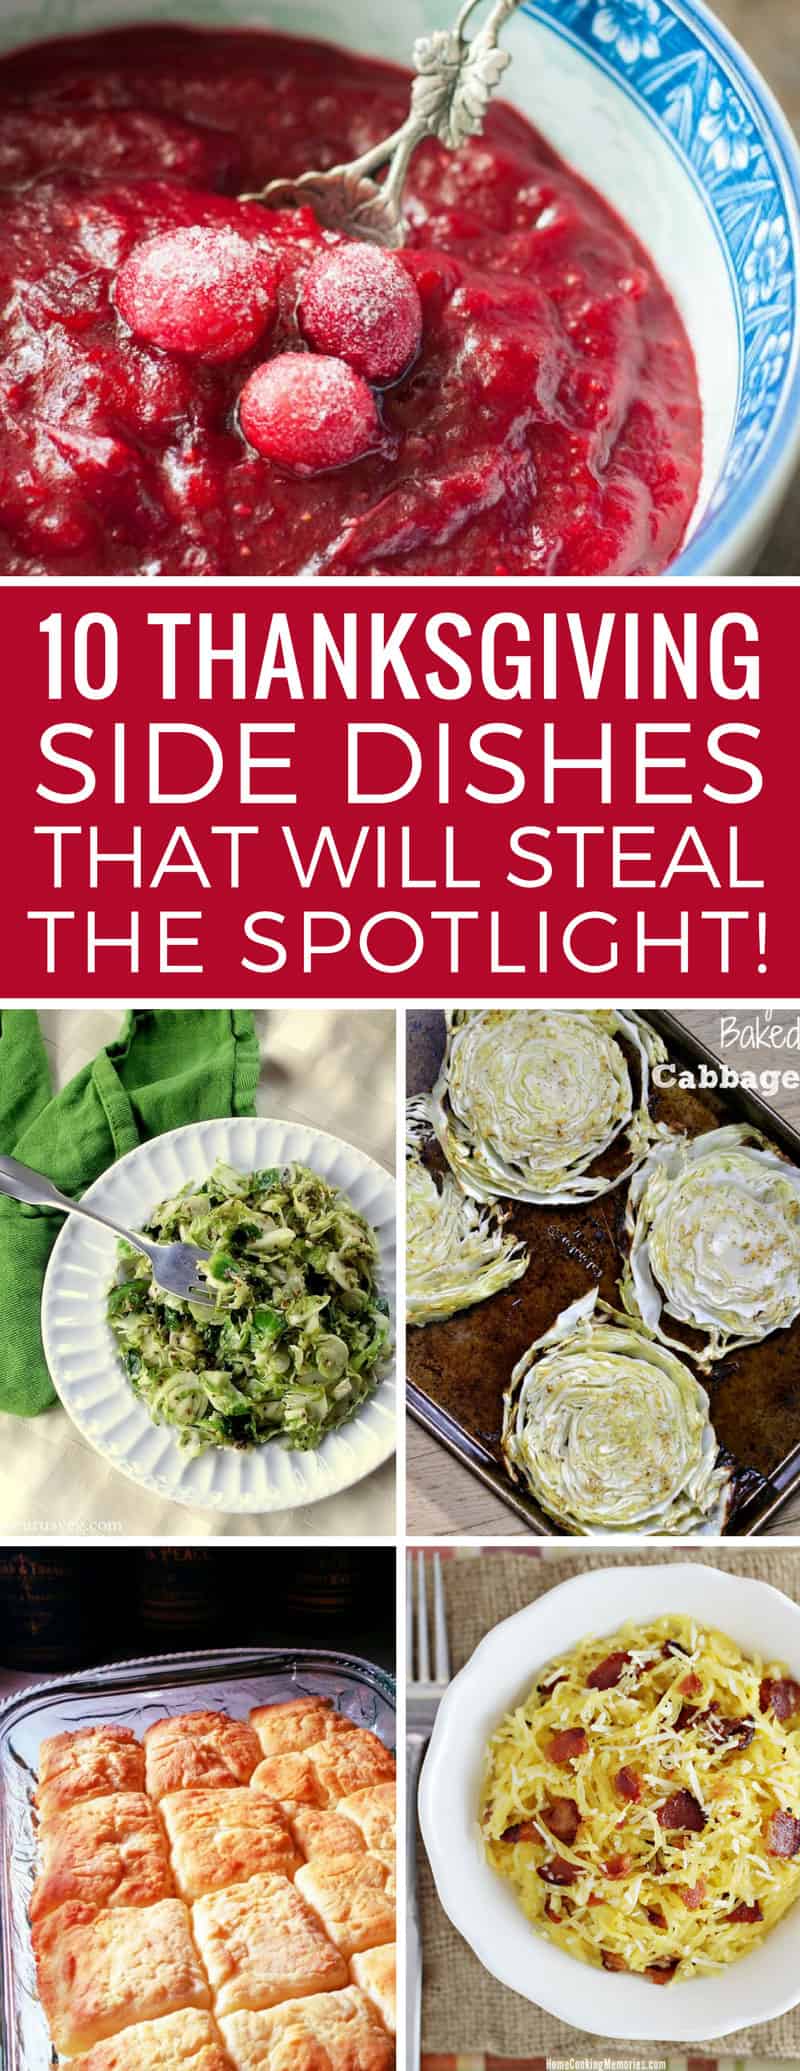 This is just what I needed - some easy Thanksgiving side dishes that don't take long to make but look and taste amazing! That cranberry sauce is making my mouth water! Thanks for sharing!